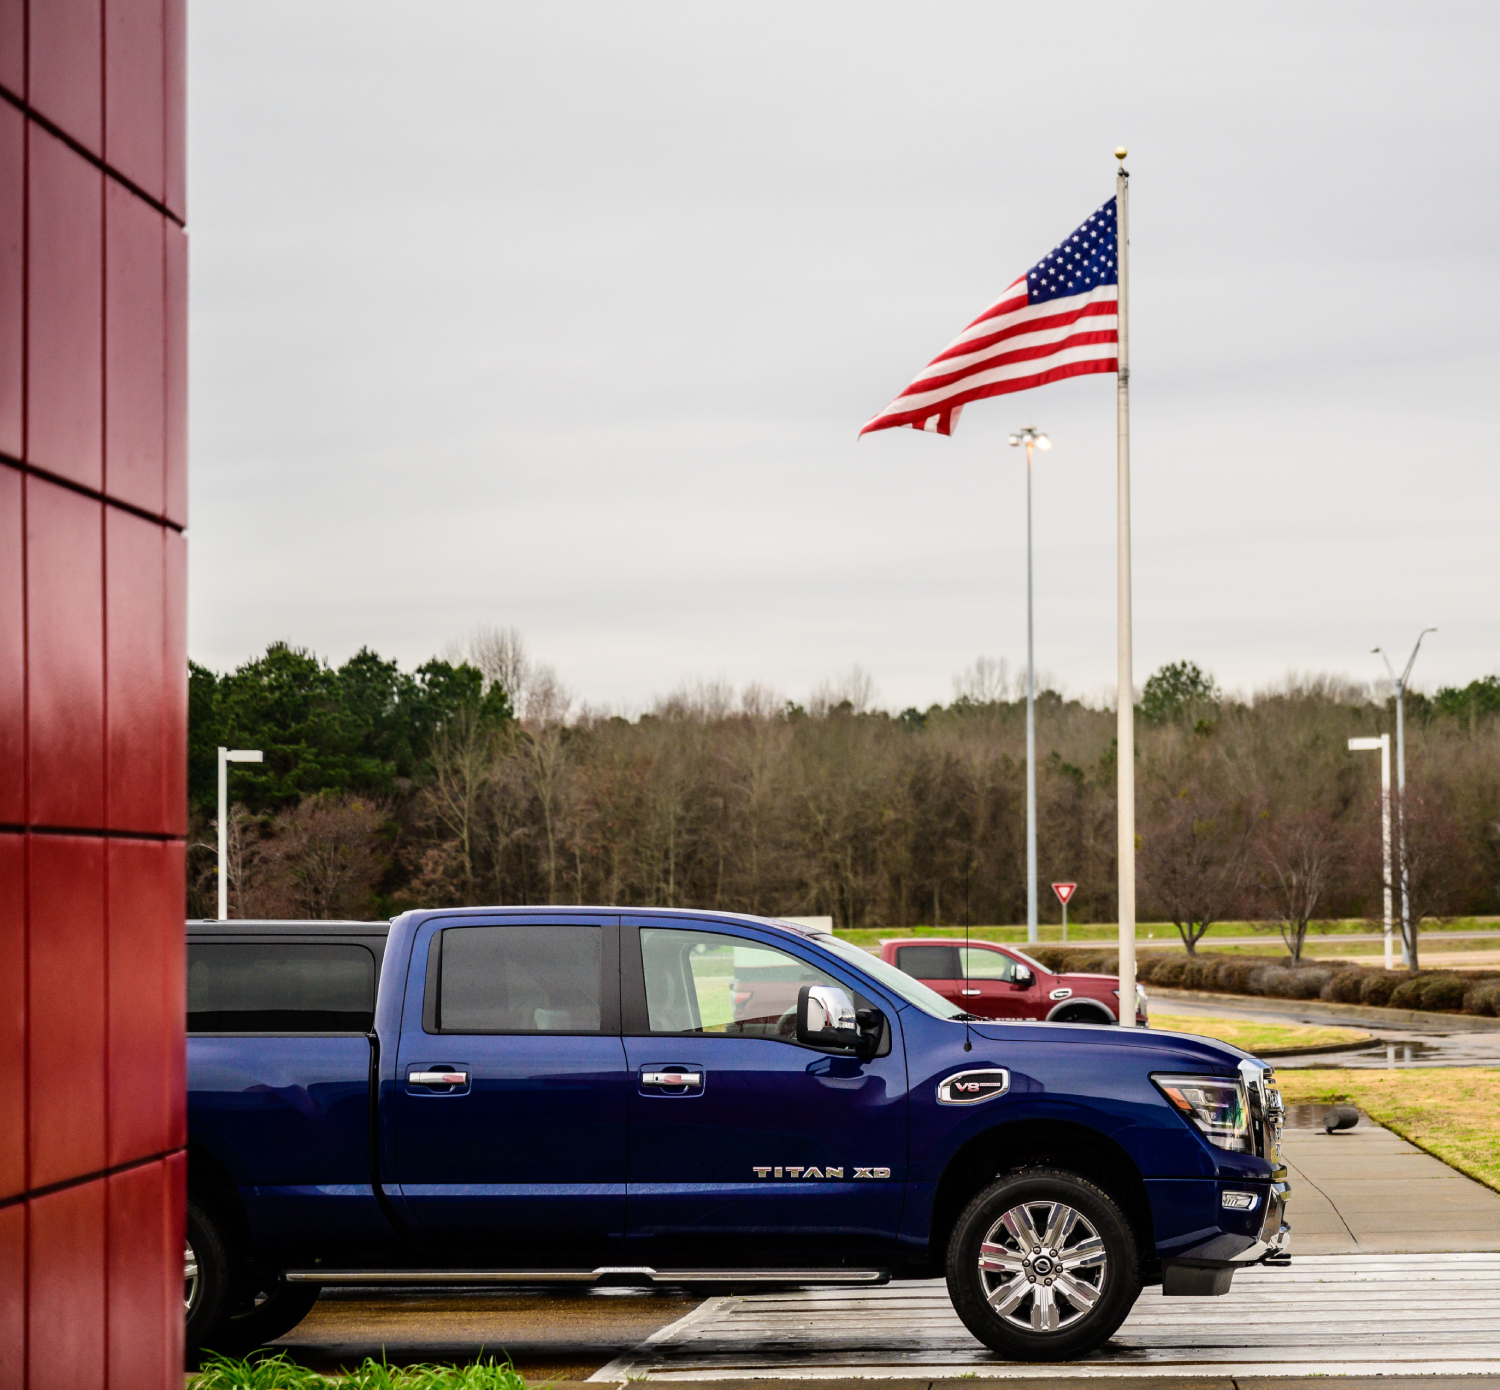 These full-size pickup trucks cost more than $100 to fill up with gas